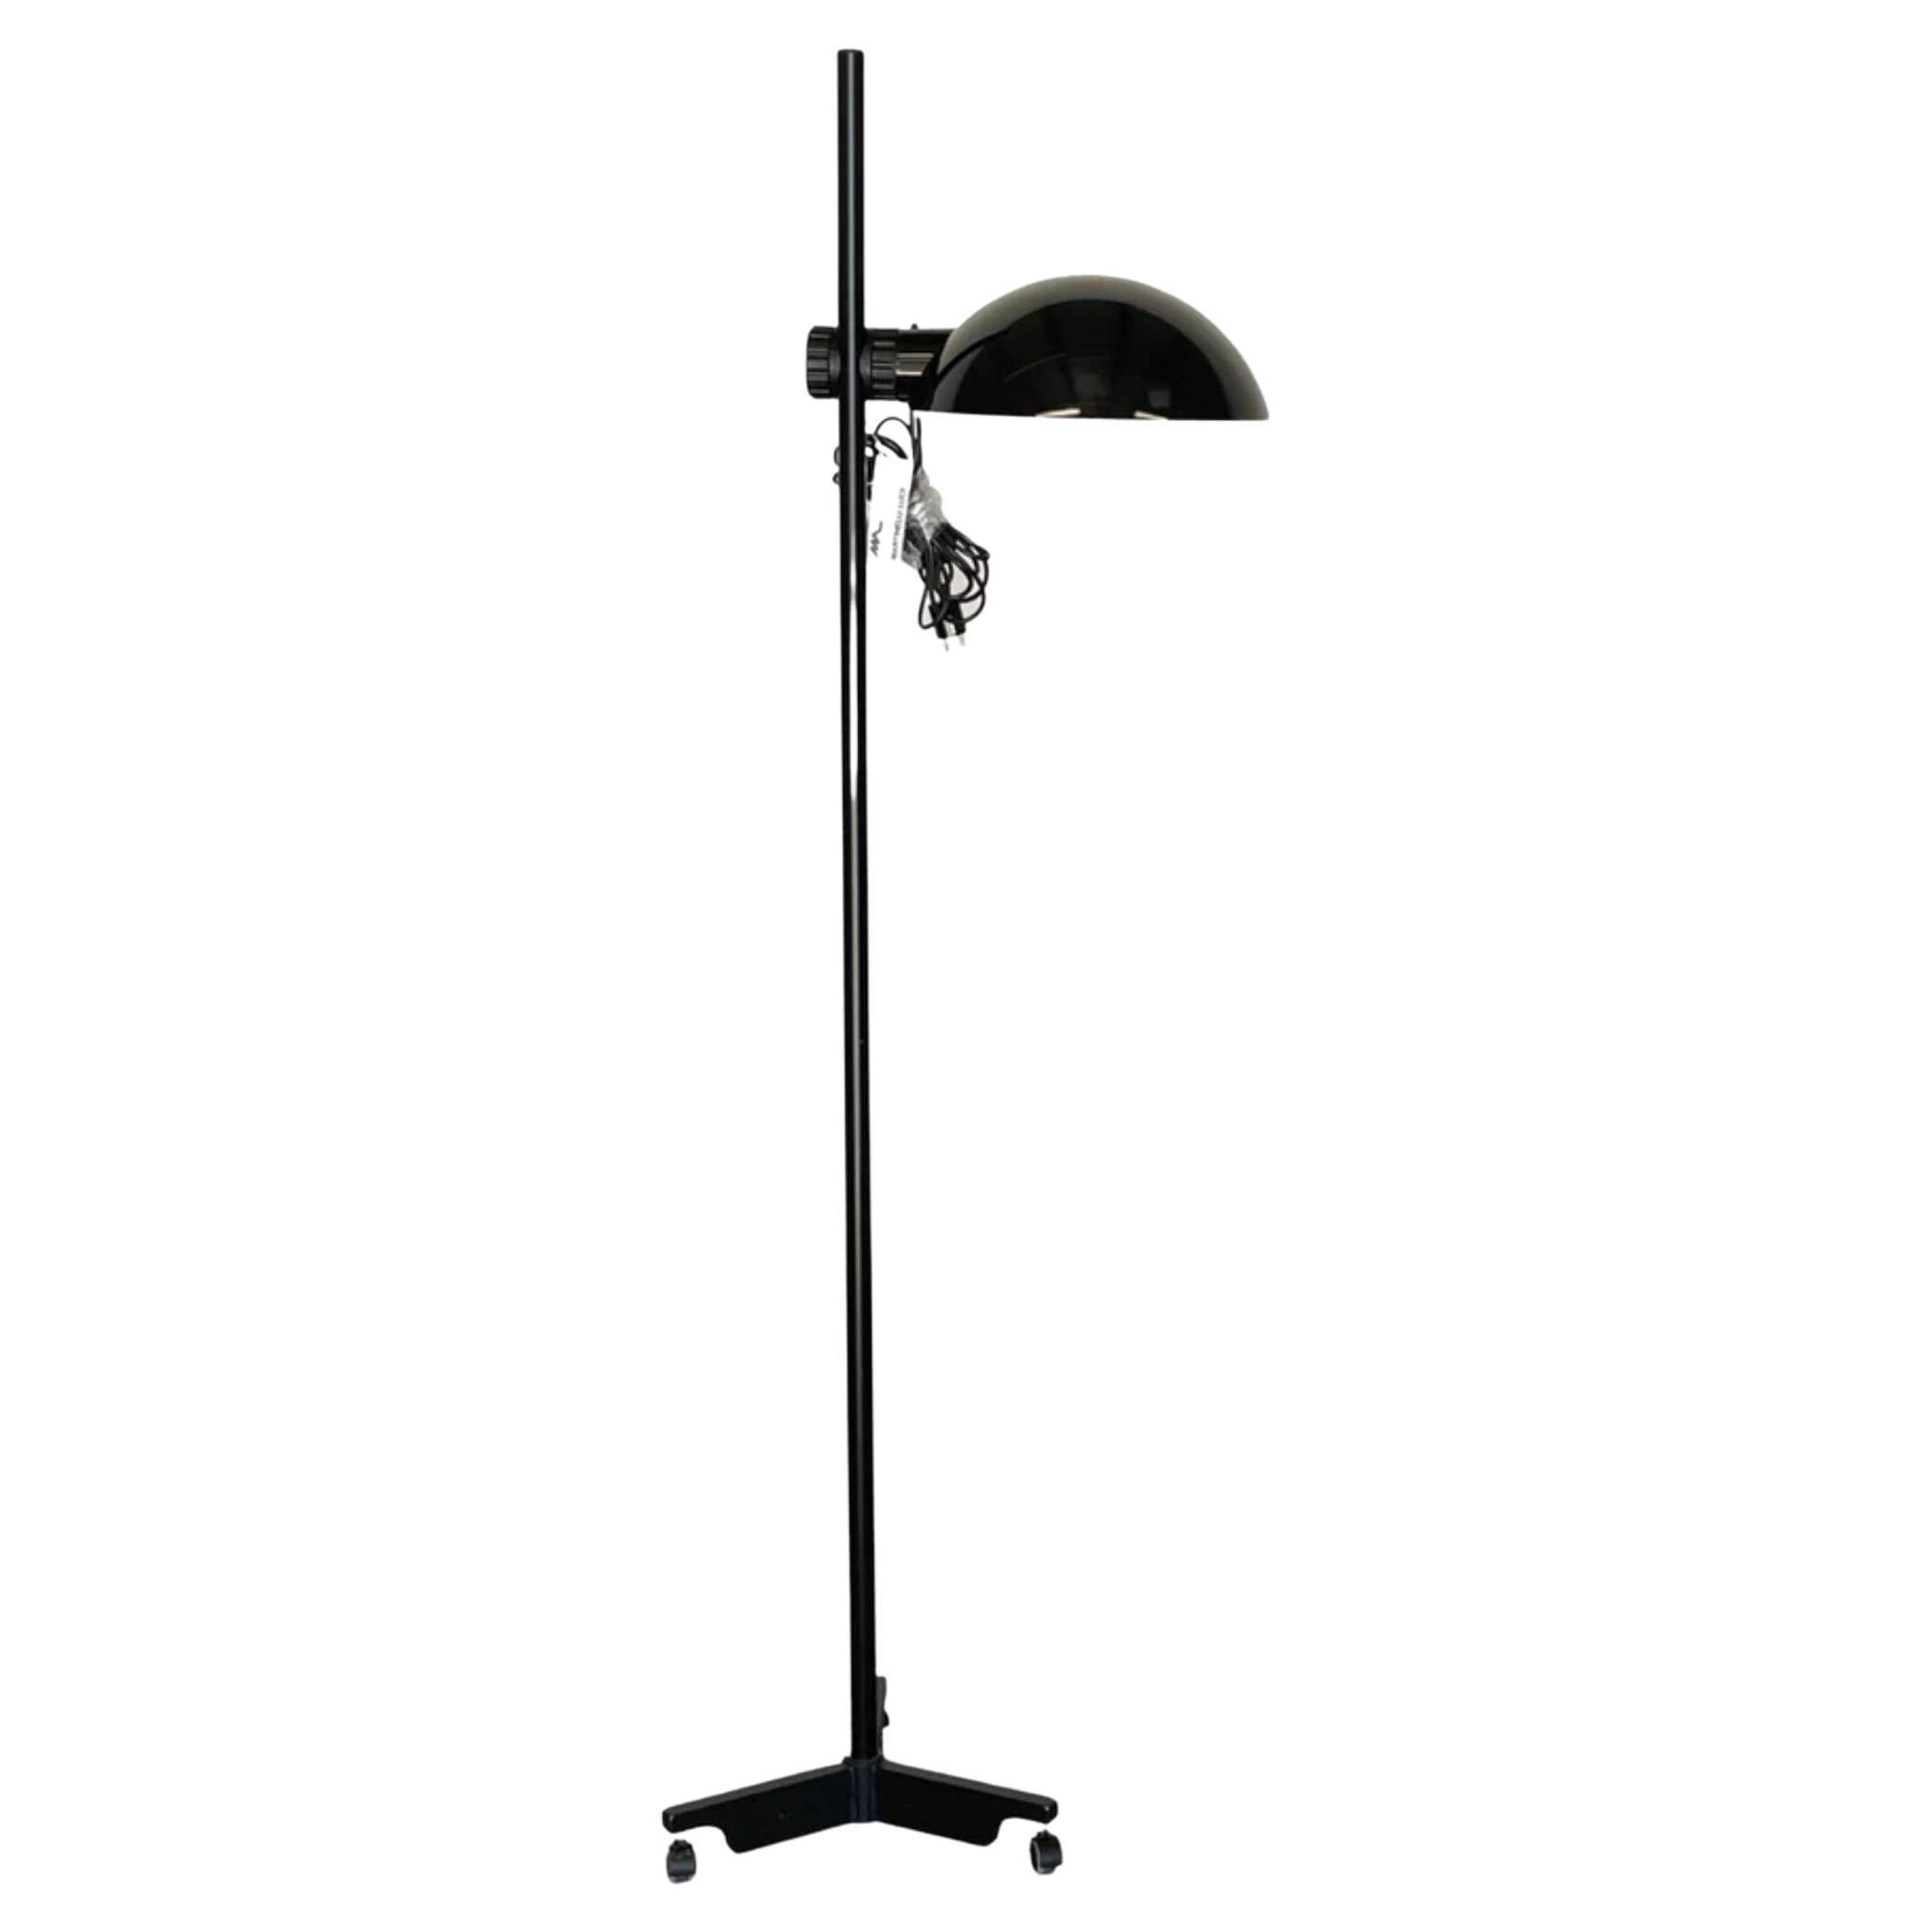 Elio Martinelli Adjustable Floor Lamp in Black for Martinelli Luce, Italy, 1970s For Sale